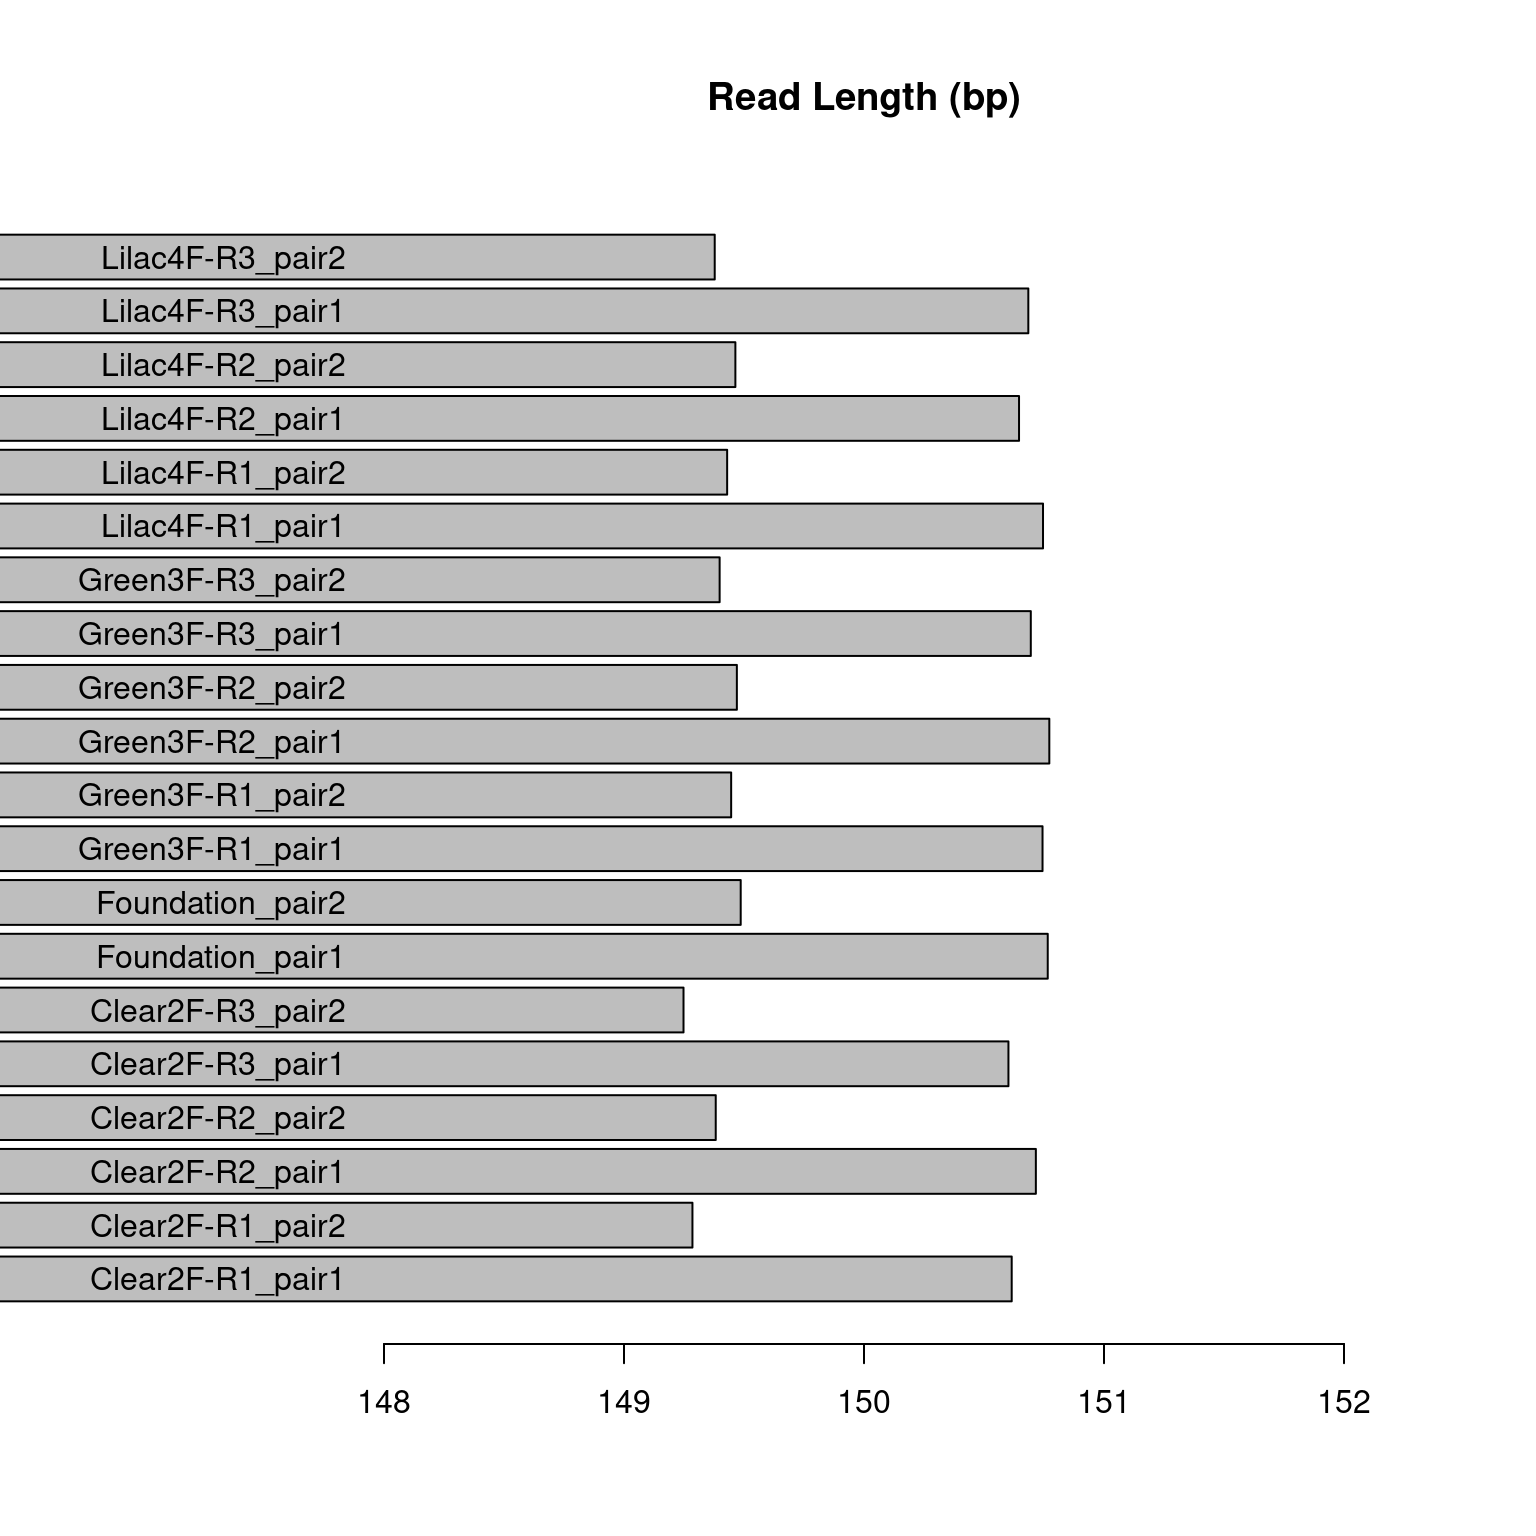 Figure displaying the mean read length in base pairs for each sample pair in the main study. The samples labeled “pair2” are the forward reads and the samples labeled “pair1” are the reverse reads.